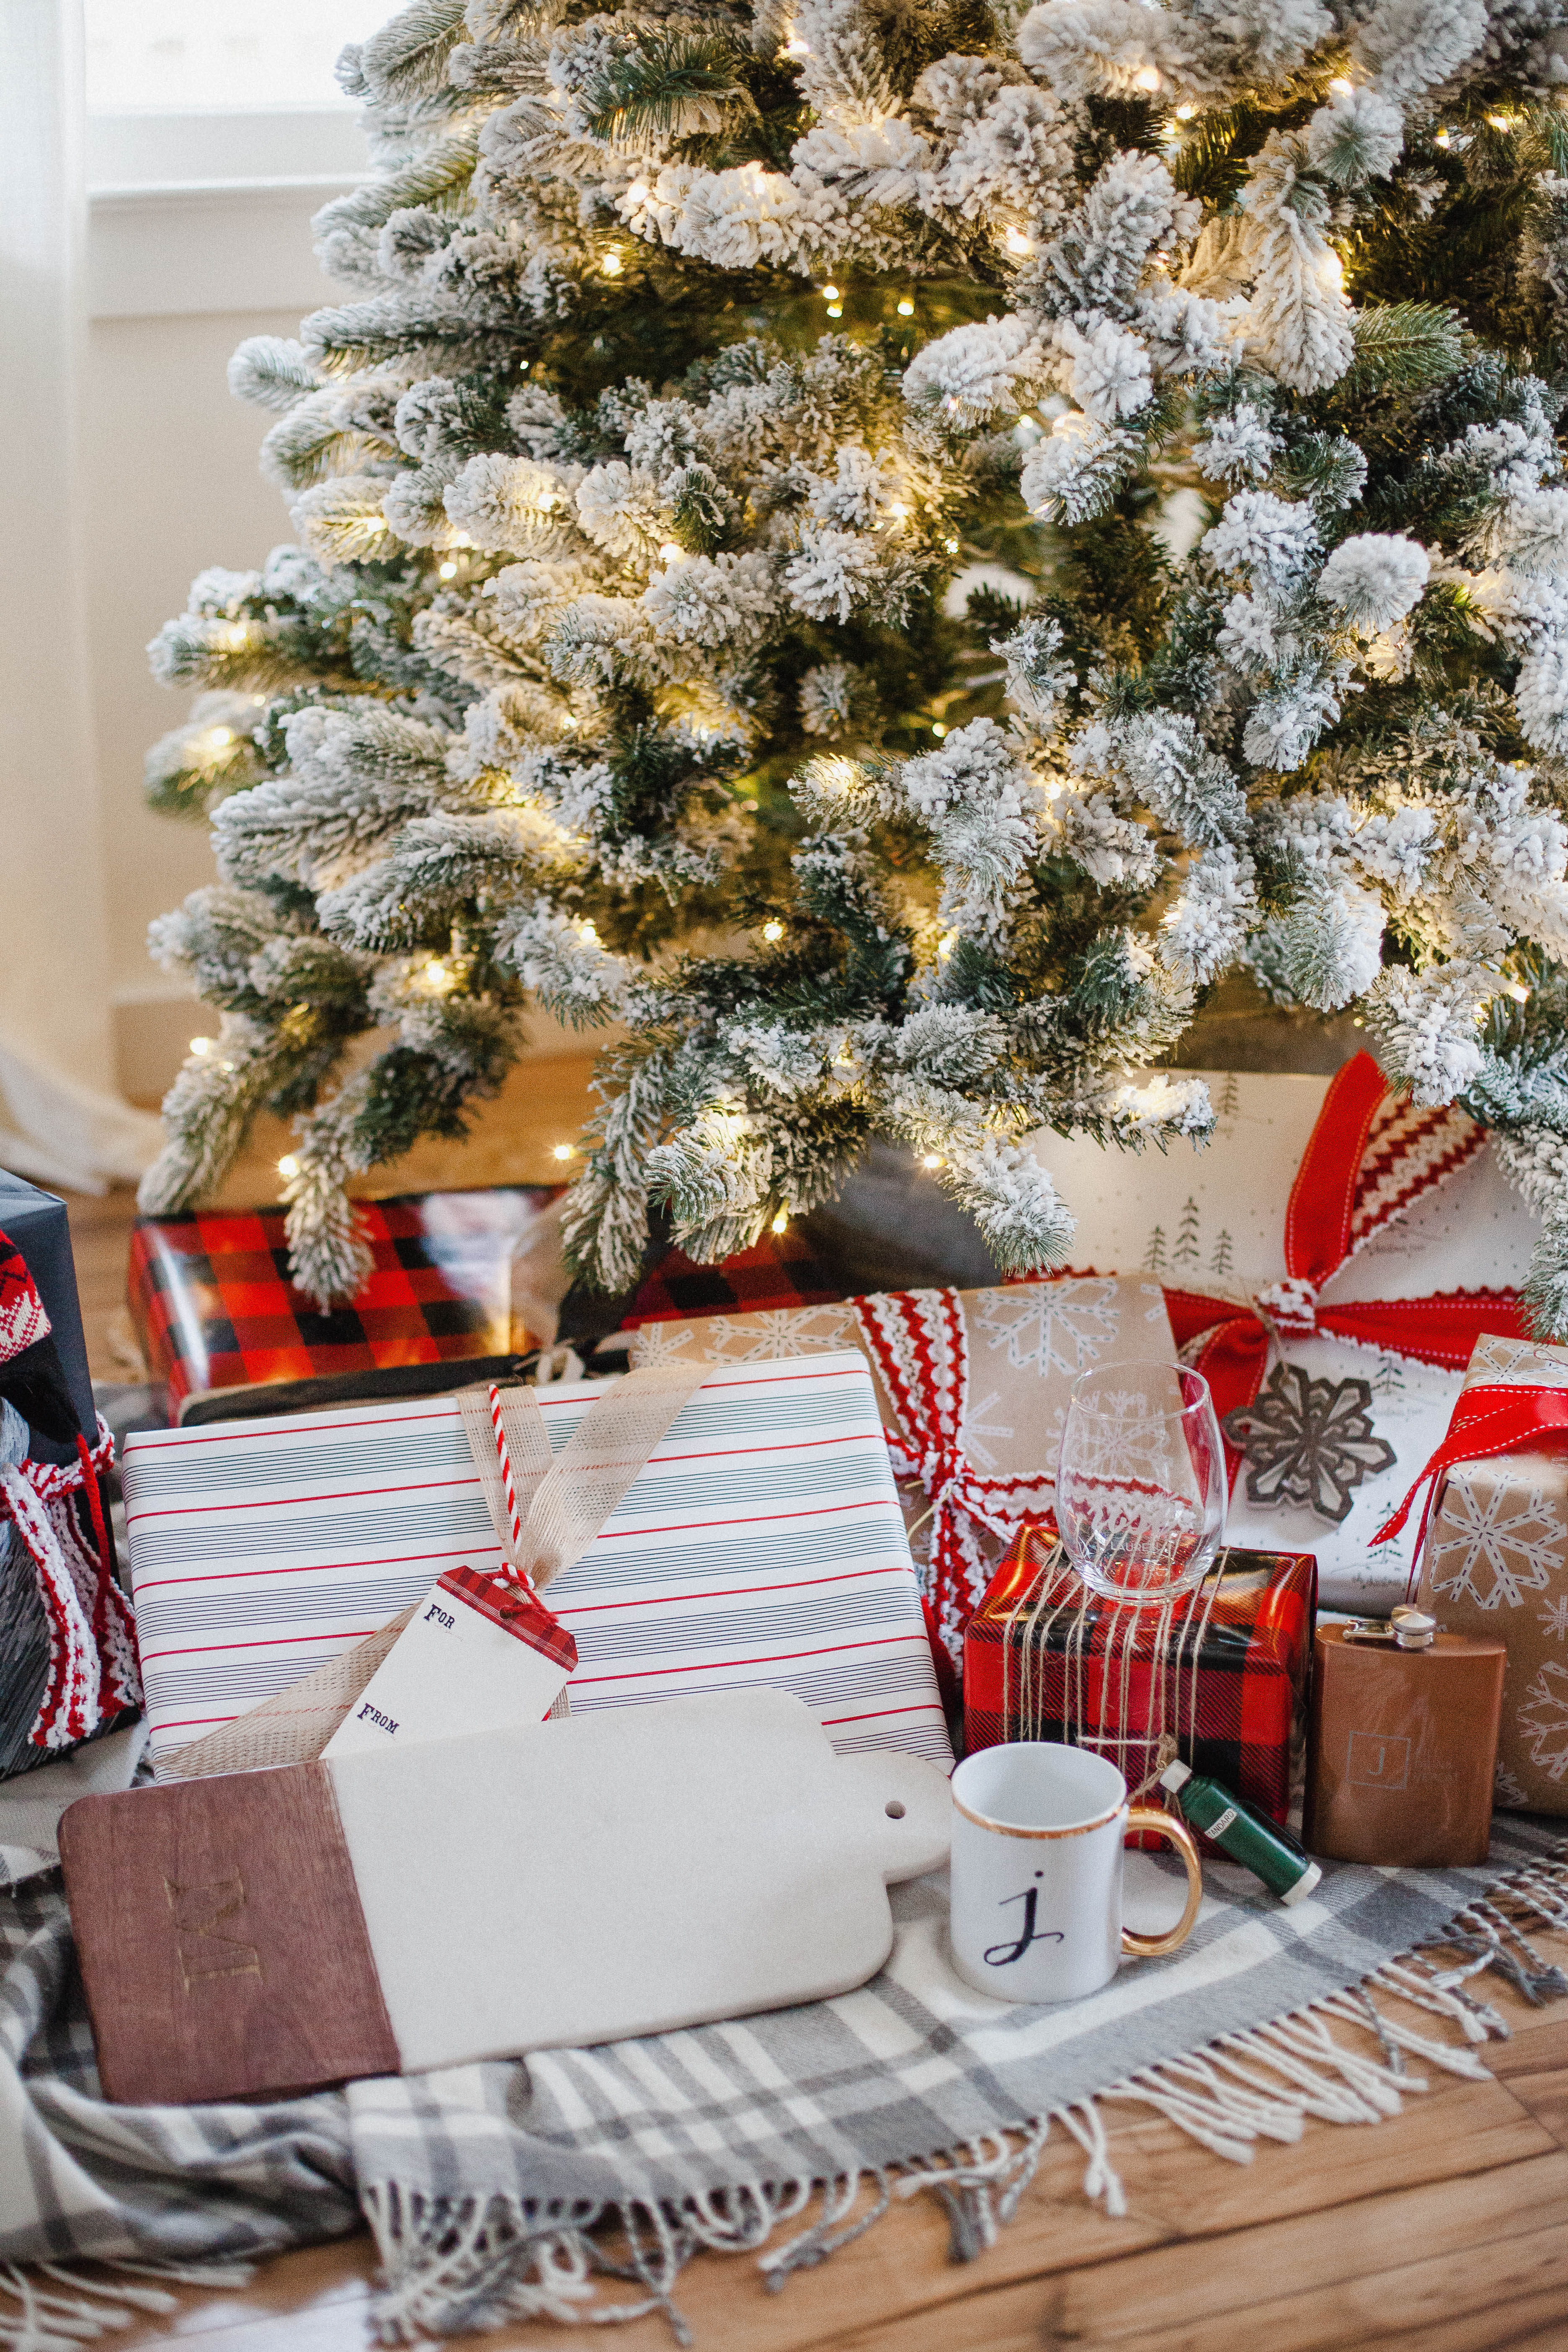 Life and style blogger Lauren McBride shares the Best Personalized Holiday Gifts for the season and how to go above and beyond standard personalization!